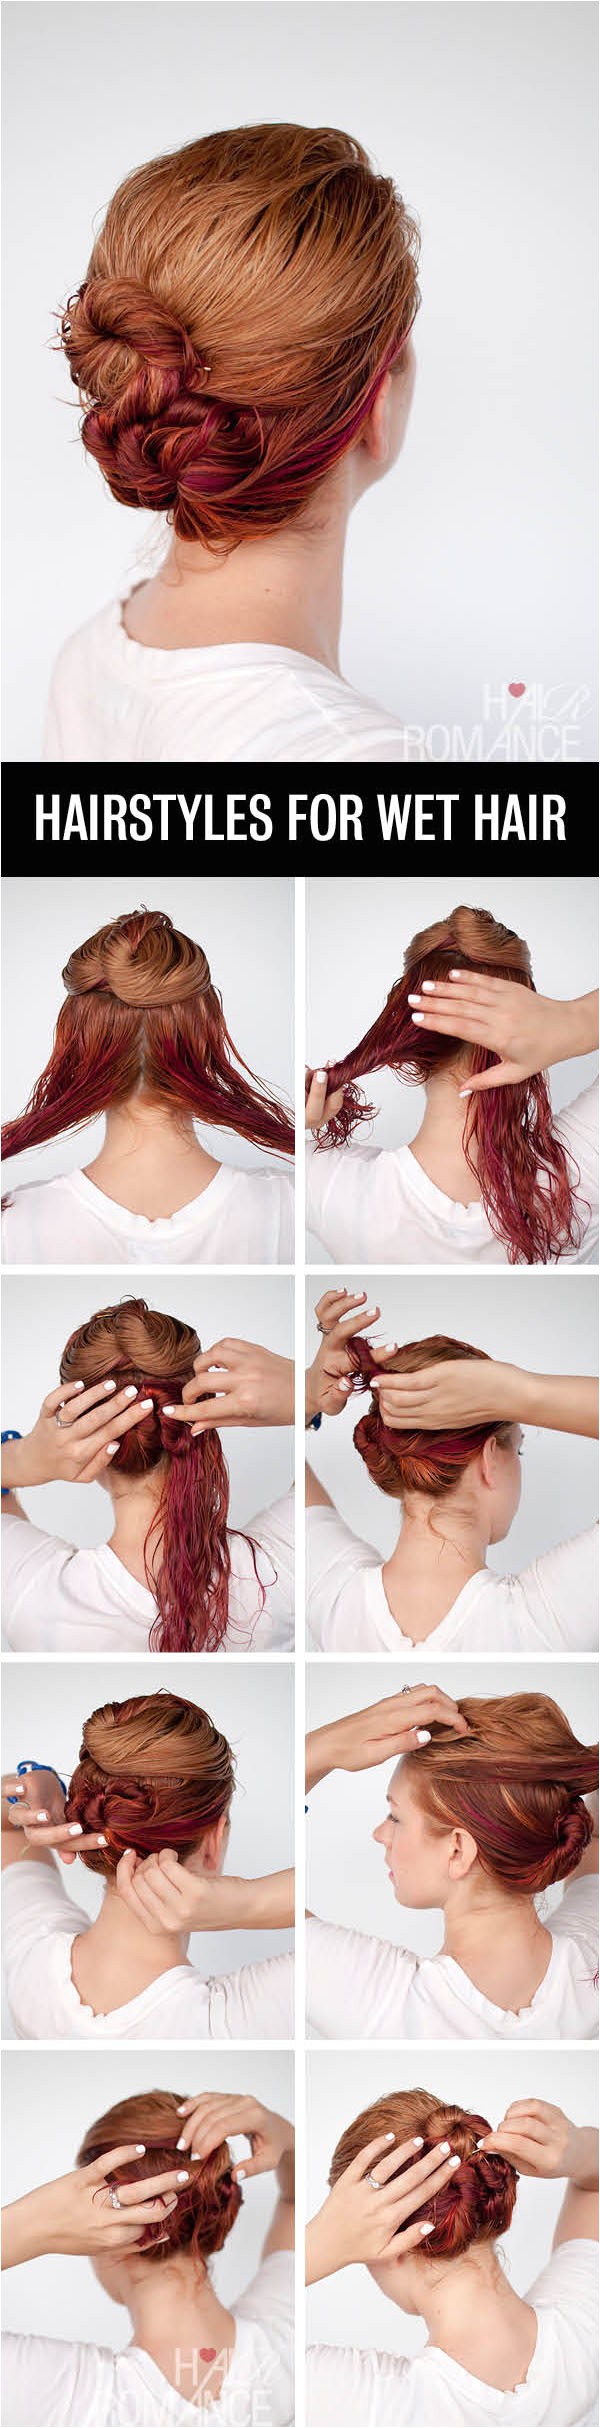 ready fast with 7 easy hairstyle tutorials for wet hair